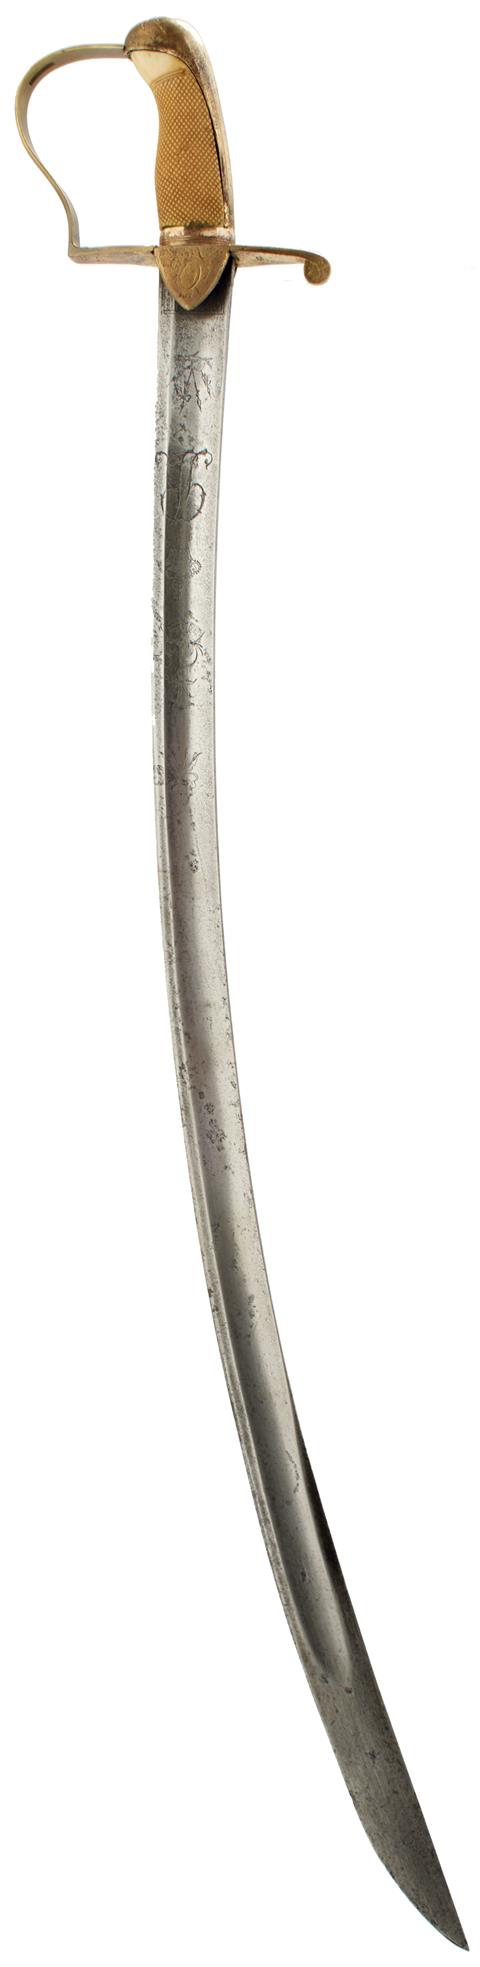 A 1796 PATTERN LIGHT CAVALRY OFFICER'S SWORD TO CAPTAIN JOHN PERRY OF THE JAMAICAN REGIMENT OF